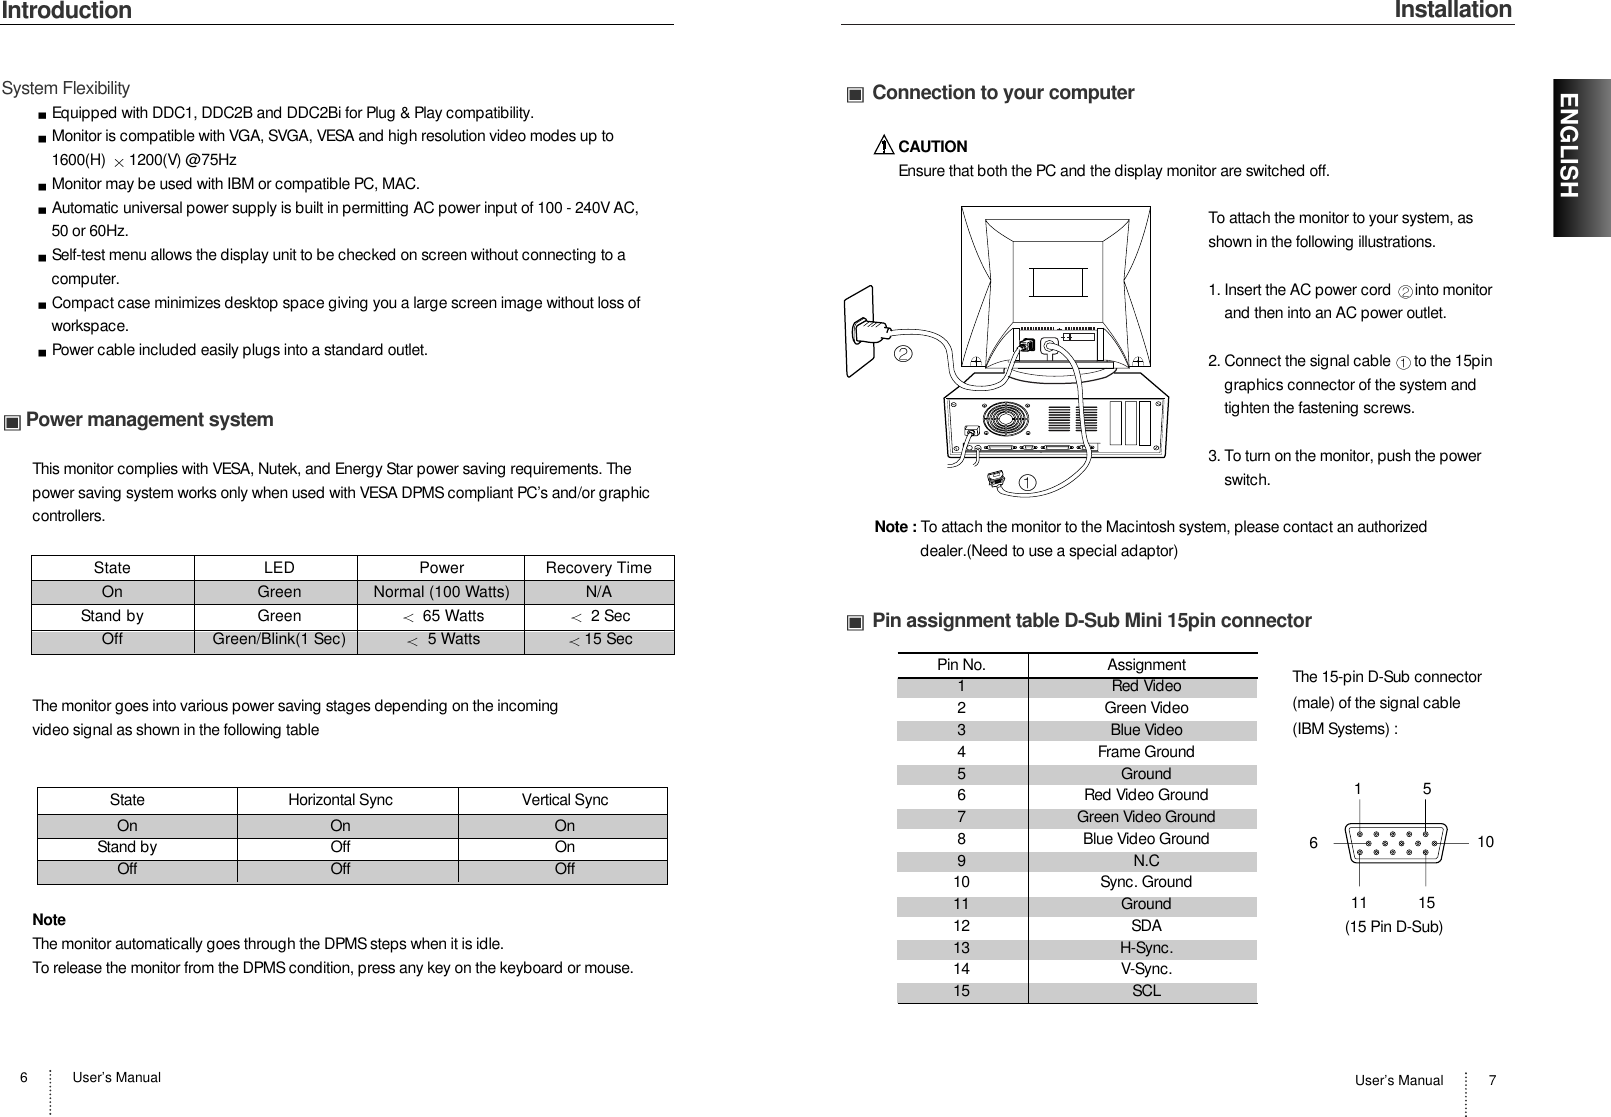 User’s Manual 7ENGLISHInstallationConnection to your computerCAUTIONEnsure that both the PC and the display monitor are switched off.To attach the monitor to your system, asshown in the following illustrations.1. Insert the AC power cord  into monitorand then into an AC power outlet.2. Connect the signal cable  to the 15pingraphics connector of the system andtighten the fastening screws.3. To turn on the monitor, push the powerswitch.Note : To attach the monitor to the Macintosh system, please contact an authorizeddealer.(Need to use a special adaptor)Pin assignment table D-Sub Mini 15pin connectorThe 15-pin D-Sub connector(male) of the signal cable (IBM Systems) :(15 Pin D-Sub)1511 15610Pin No. Assignment1 Red Video2 Green Video3 Blue Video4 Frame Ground5 Ground6 Red Video Ground7 Green Video Ground8 Blue Video Ground9 N.C10 Sync. Ground11 Ground12 SDA13 H-Sync.14 V-Sync.15 SCLIntroductionUser’s Manual6System FlexibilityEquipped with DDC1, DDC2B and DDC2Bi for Plug &amp; Play compatibility.Monitor is compatible with VGA, SVGA, VESA and high resolution video modes up to 1600(H)  1200(V) @ 75HzMonitor may be used with IBM or compatible PC, MAC.Automatic universal power supply is built in permitting AC power input of 100 - 240V AC, 50 or 60Hz.Self-test menu allows the display unit to be checked on screen without connecting to acomputer.Compact case minimizes desktop space giving you a large screen image without loss ofworkspace.Power cable included easily plugs into a standard outlet.Power management systemThis monitor complies with VESA, Nutek, and Energy Star power saving requirements. Thepower saving system works only when used with VESA DPMS compliant PC’s and/or graphiccontrollers.The monitor goes into various power saving stages depending on the incomingvideo signal as shown in the following tableNoteThe monitor automatically goes through the DPMS steps when it is idle.To release the monitor from the DPMS condition, press any key on the keyboard or mouse.State Horizontal Sync Vertical SyncOn On OnStand by Off OnOff Off OffState LED Power Recovery TimeOn Green Normal (100 Watts) N/AStand by Green 65 Watts 2 SecOff Green/Blink(1 Sec) 5 Watts 15 Sec